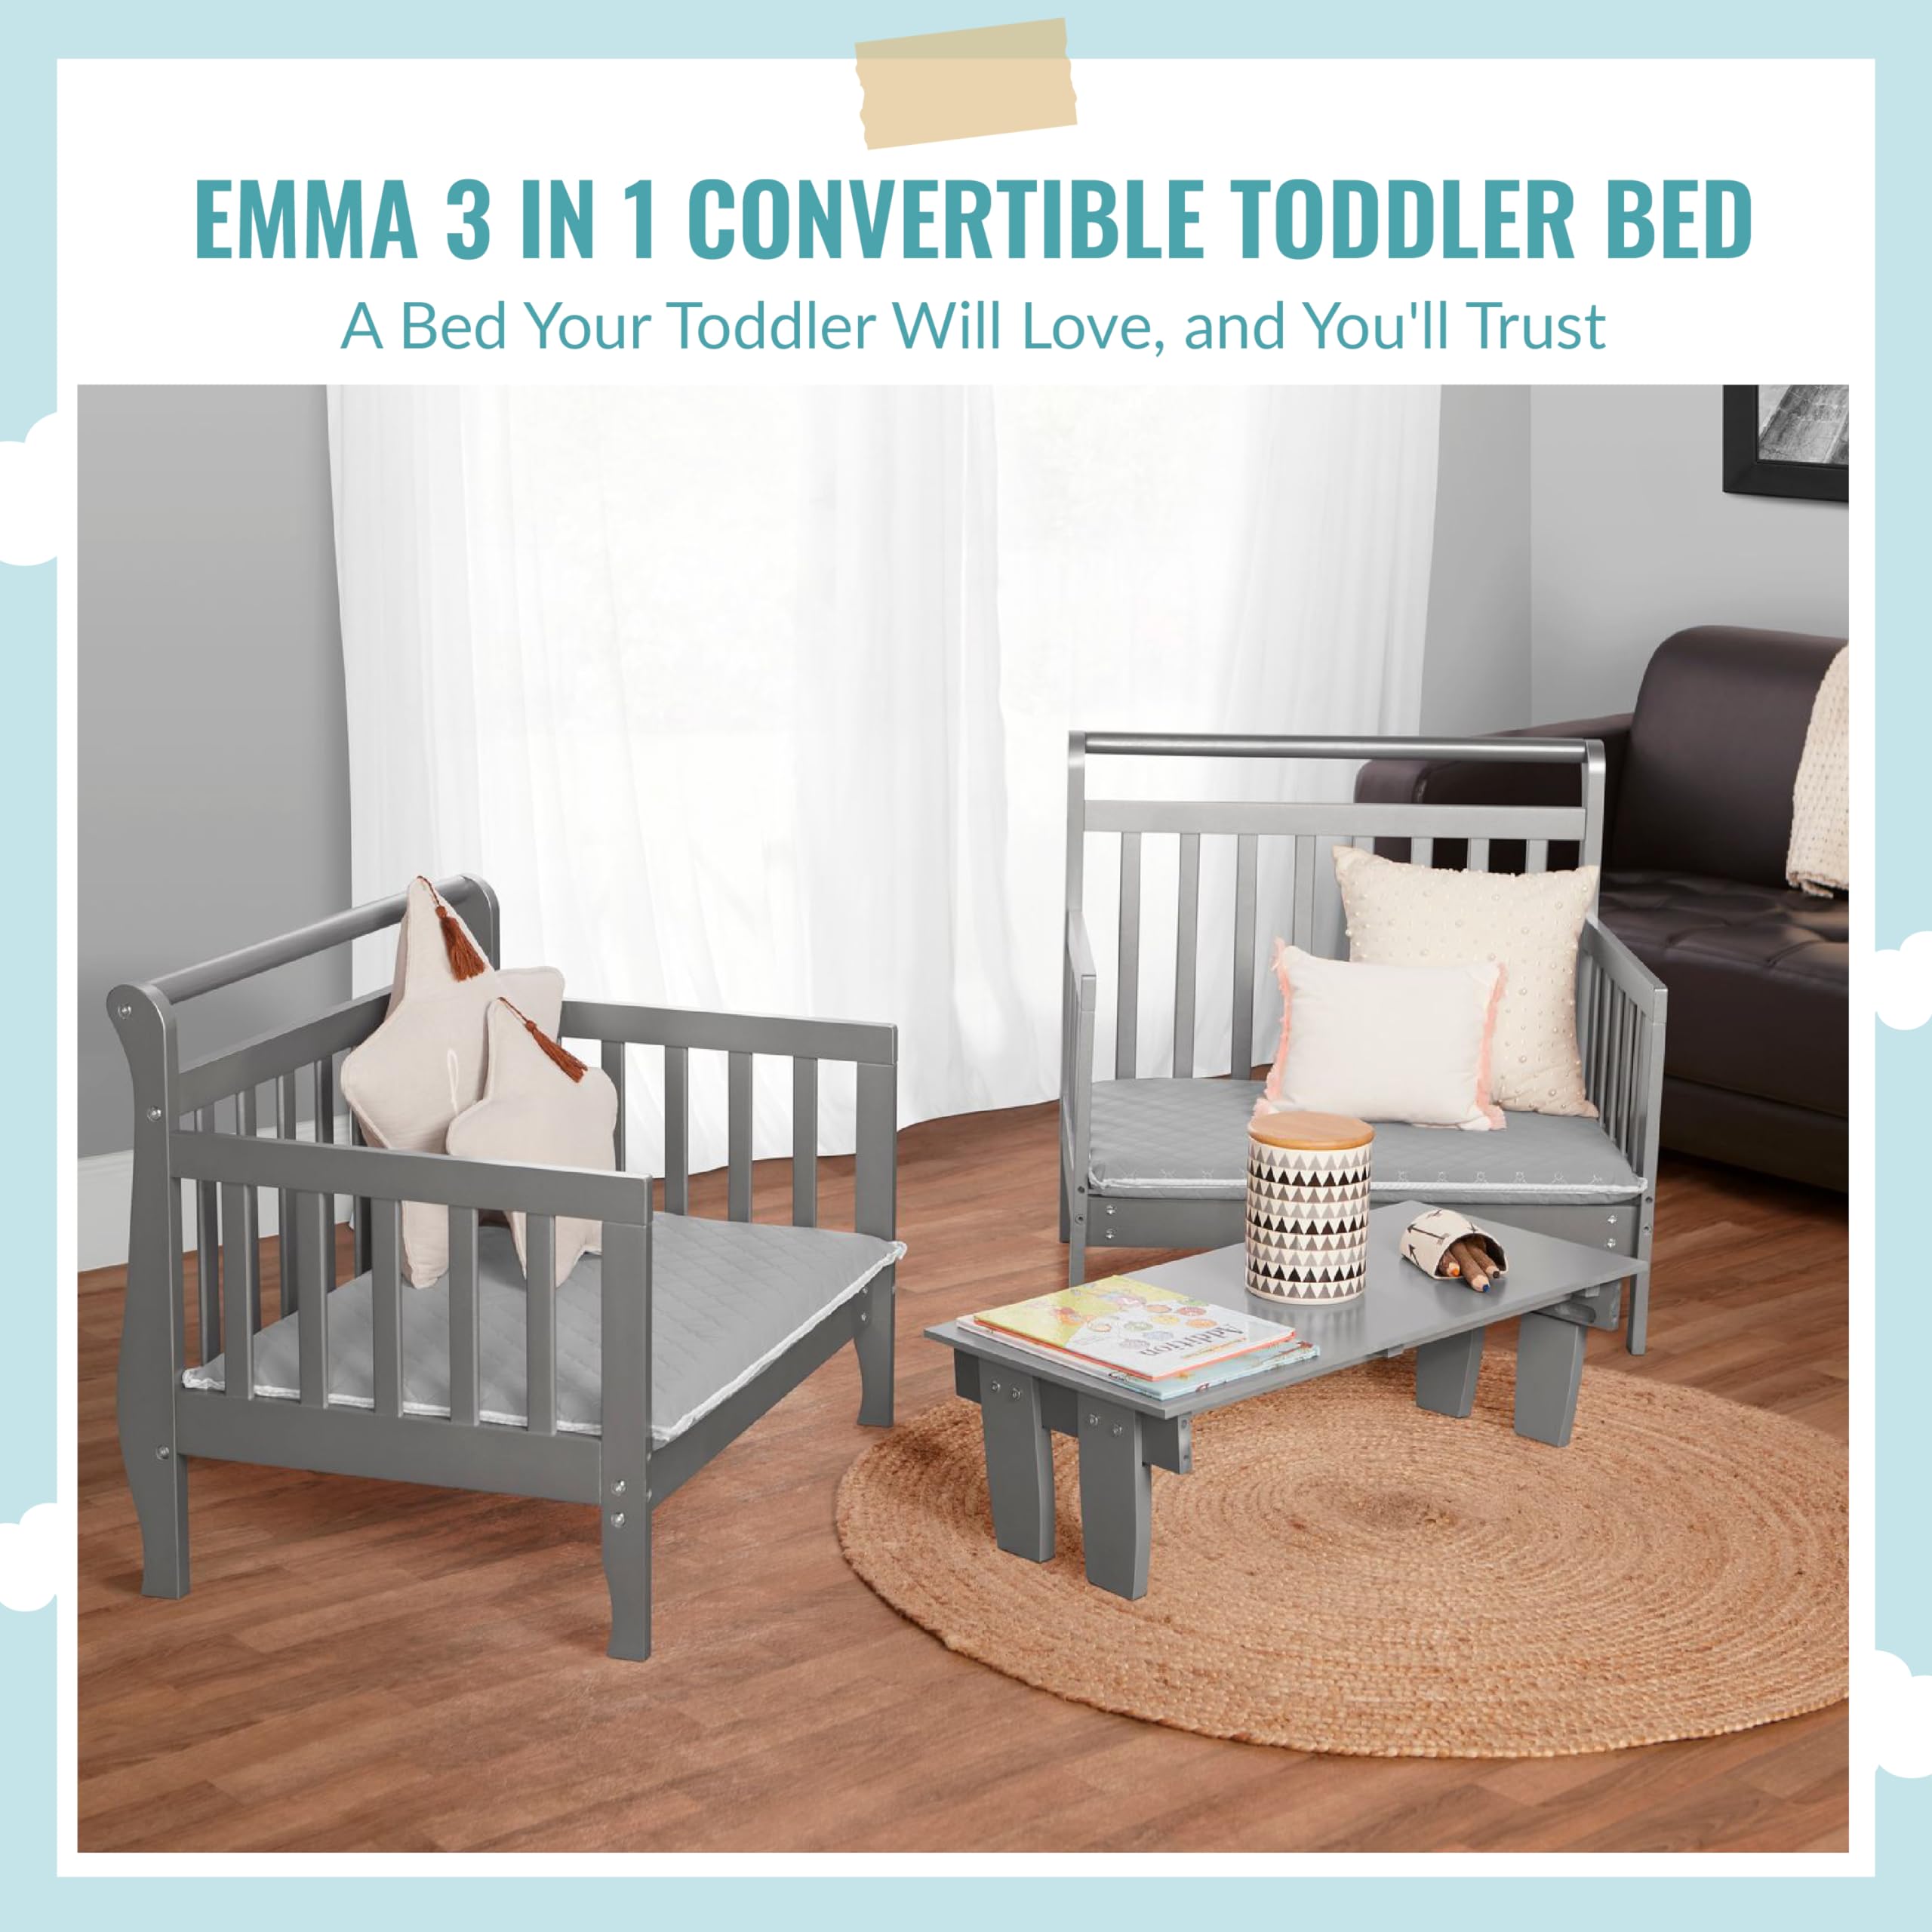 Dream On Me Emma 3-in-1 Convertible Toddler Bed in Storm Grey, Converts to Two Chairs and-Table, Low to Floor Design, JPMA Certified, Non-Toxic Finishes, Safety Rails